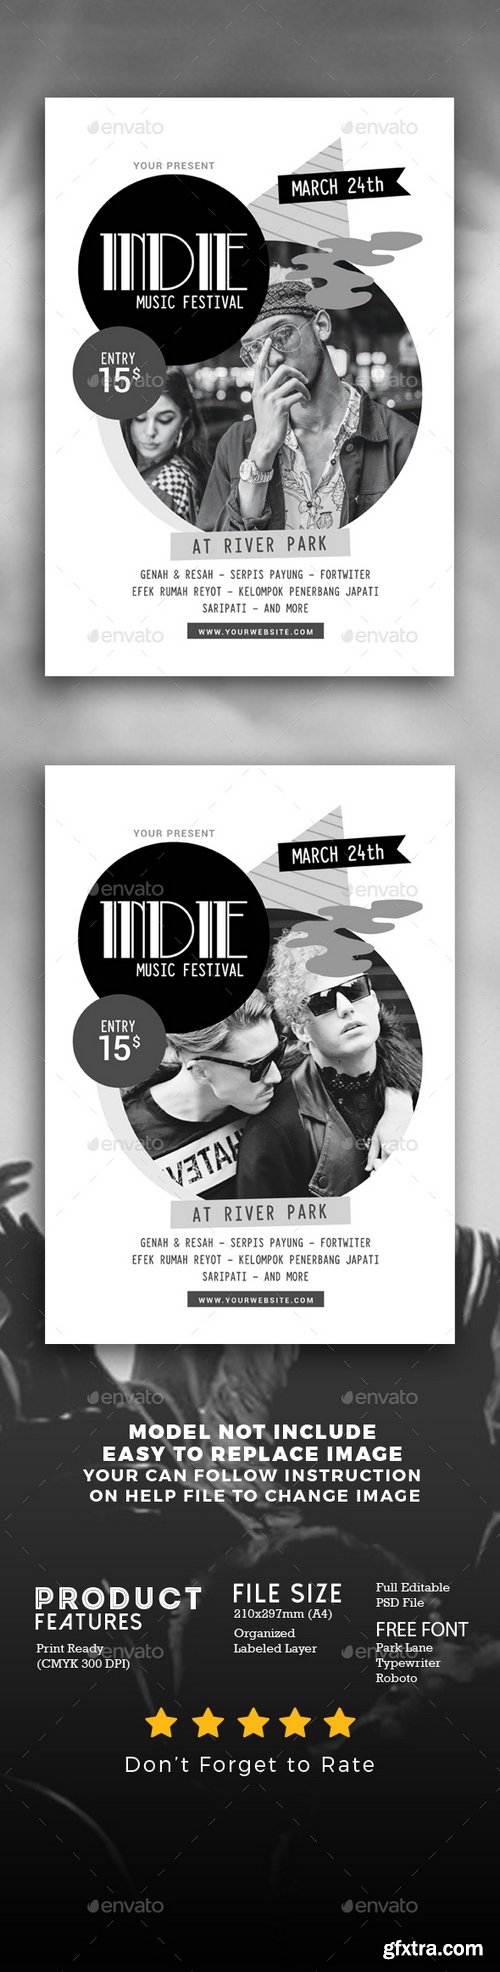 Graphicriver - Abstract Indie Music Flyer 21581189